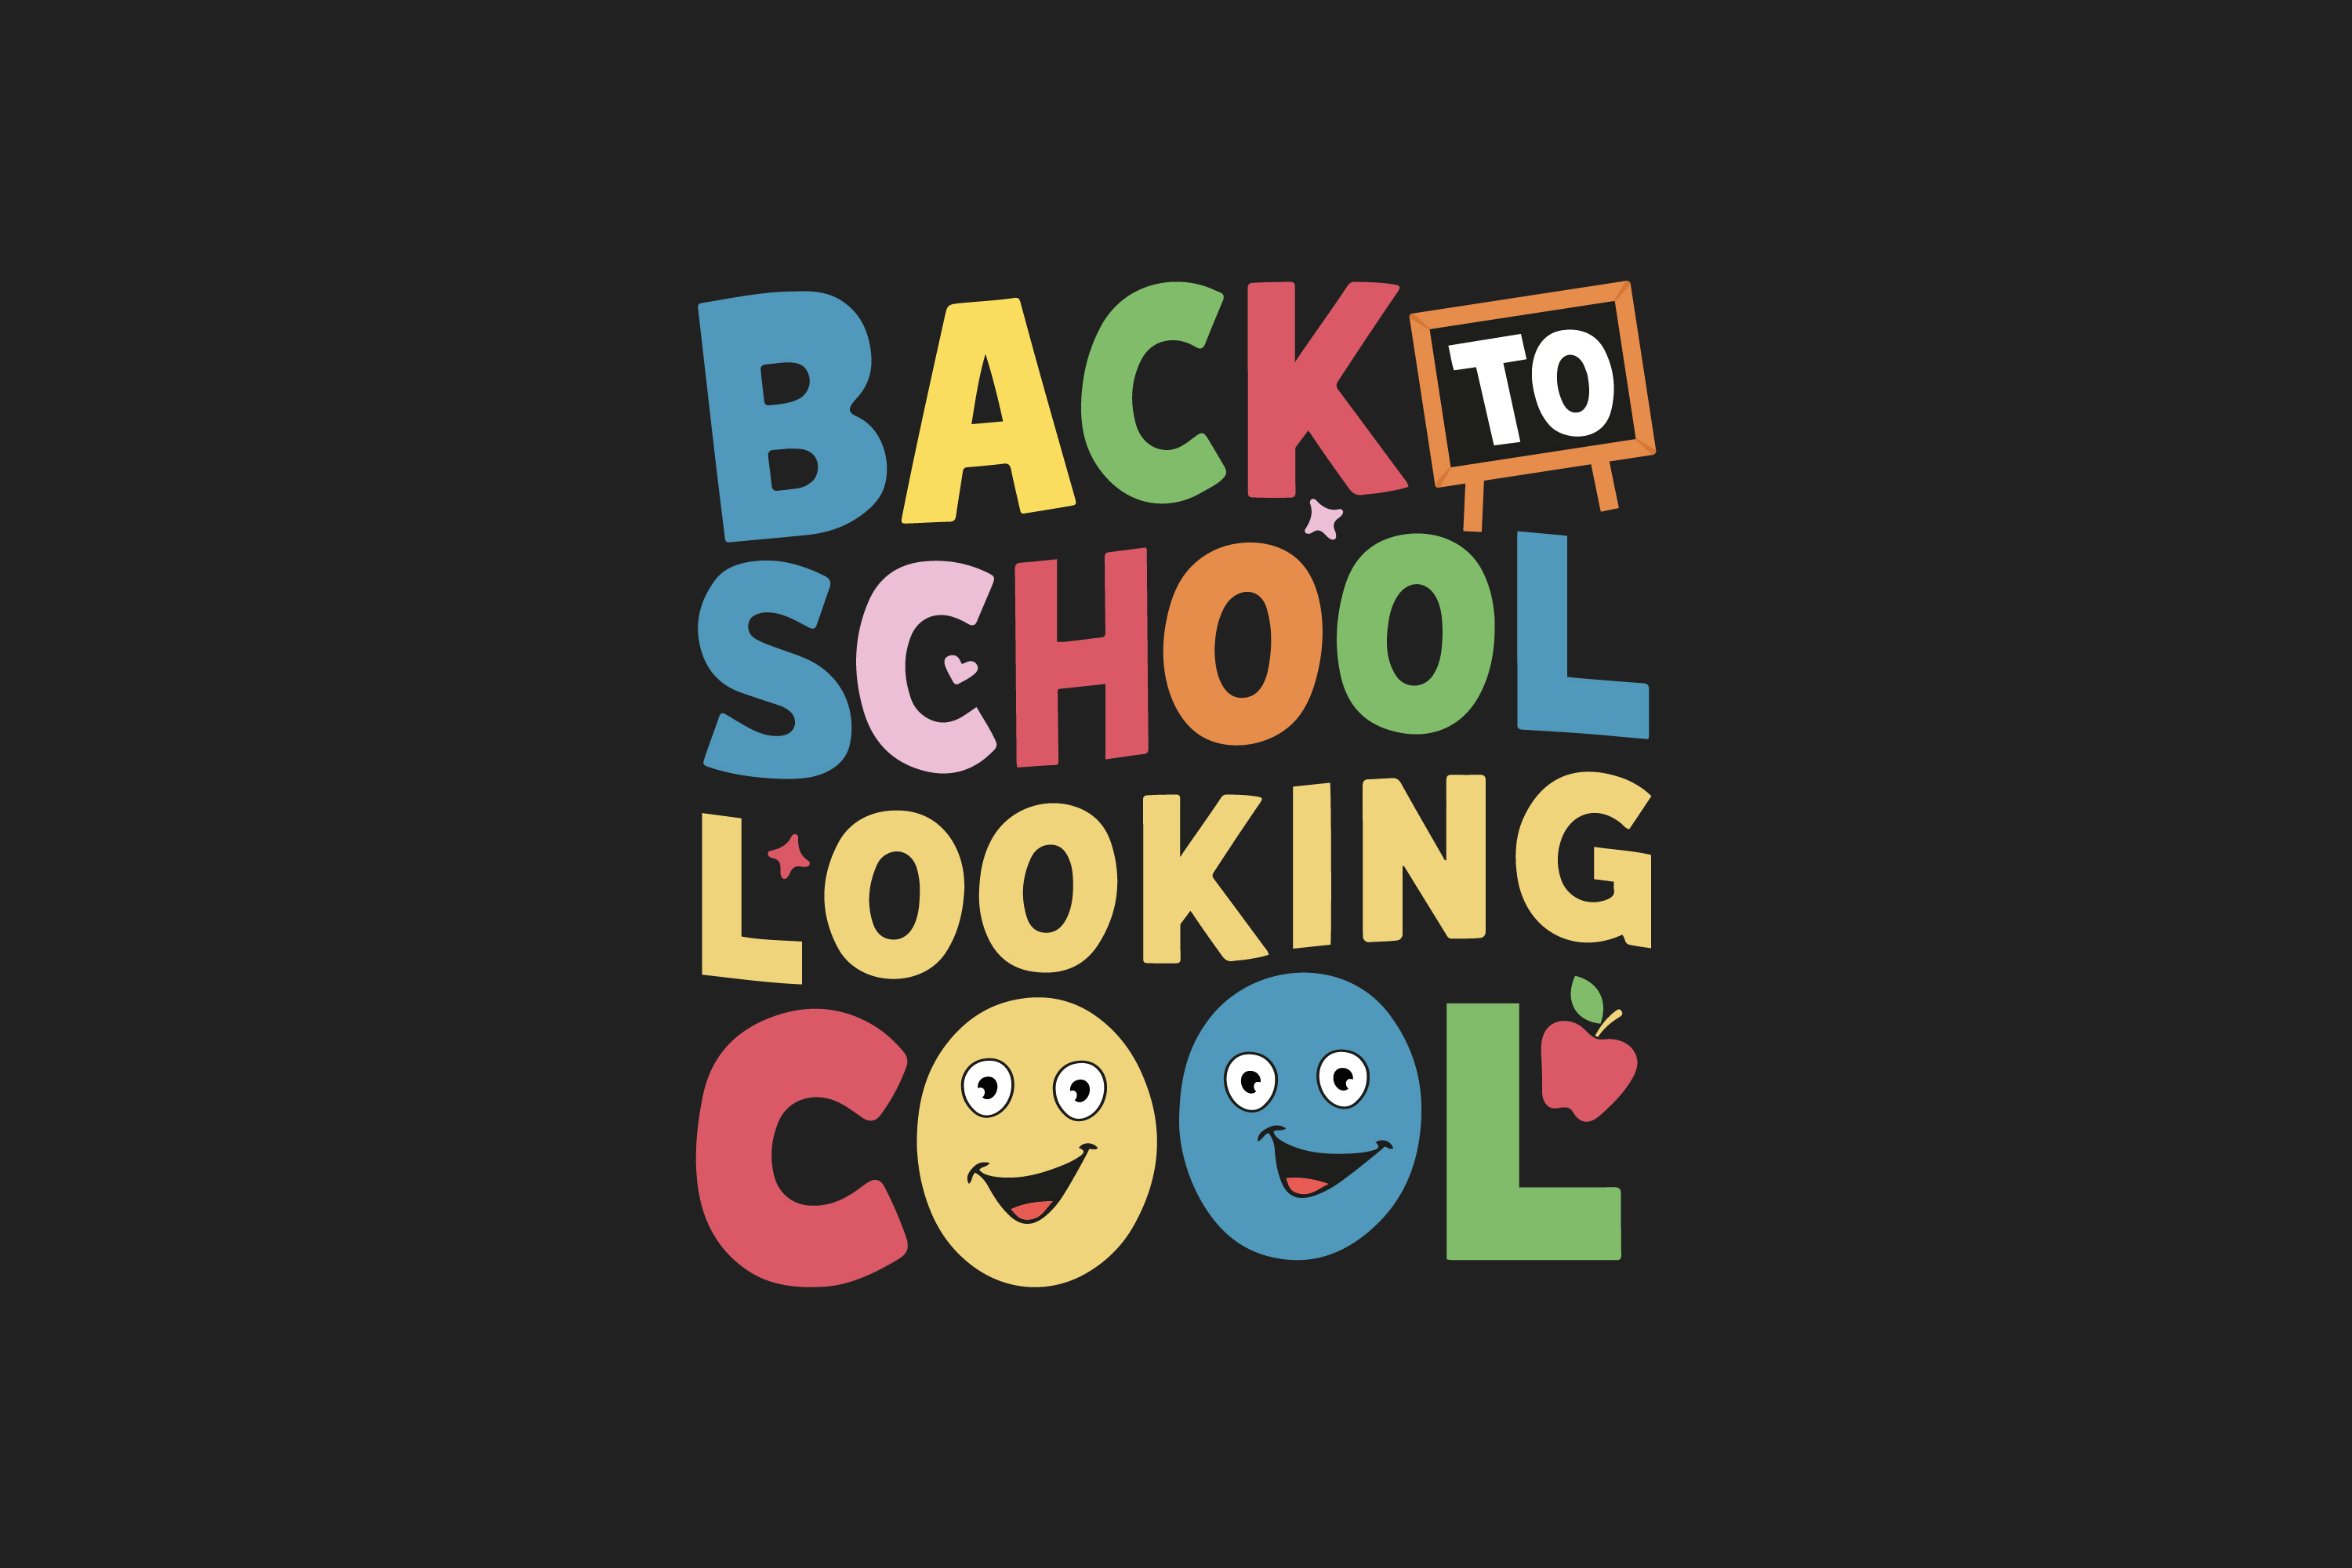 back to school 41 19 202